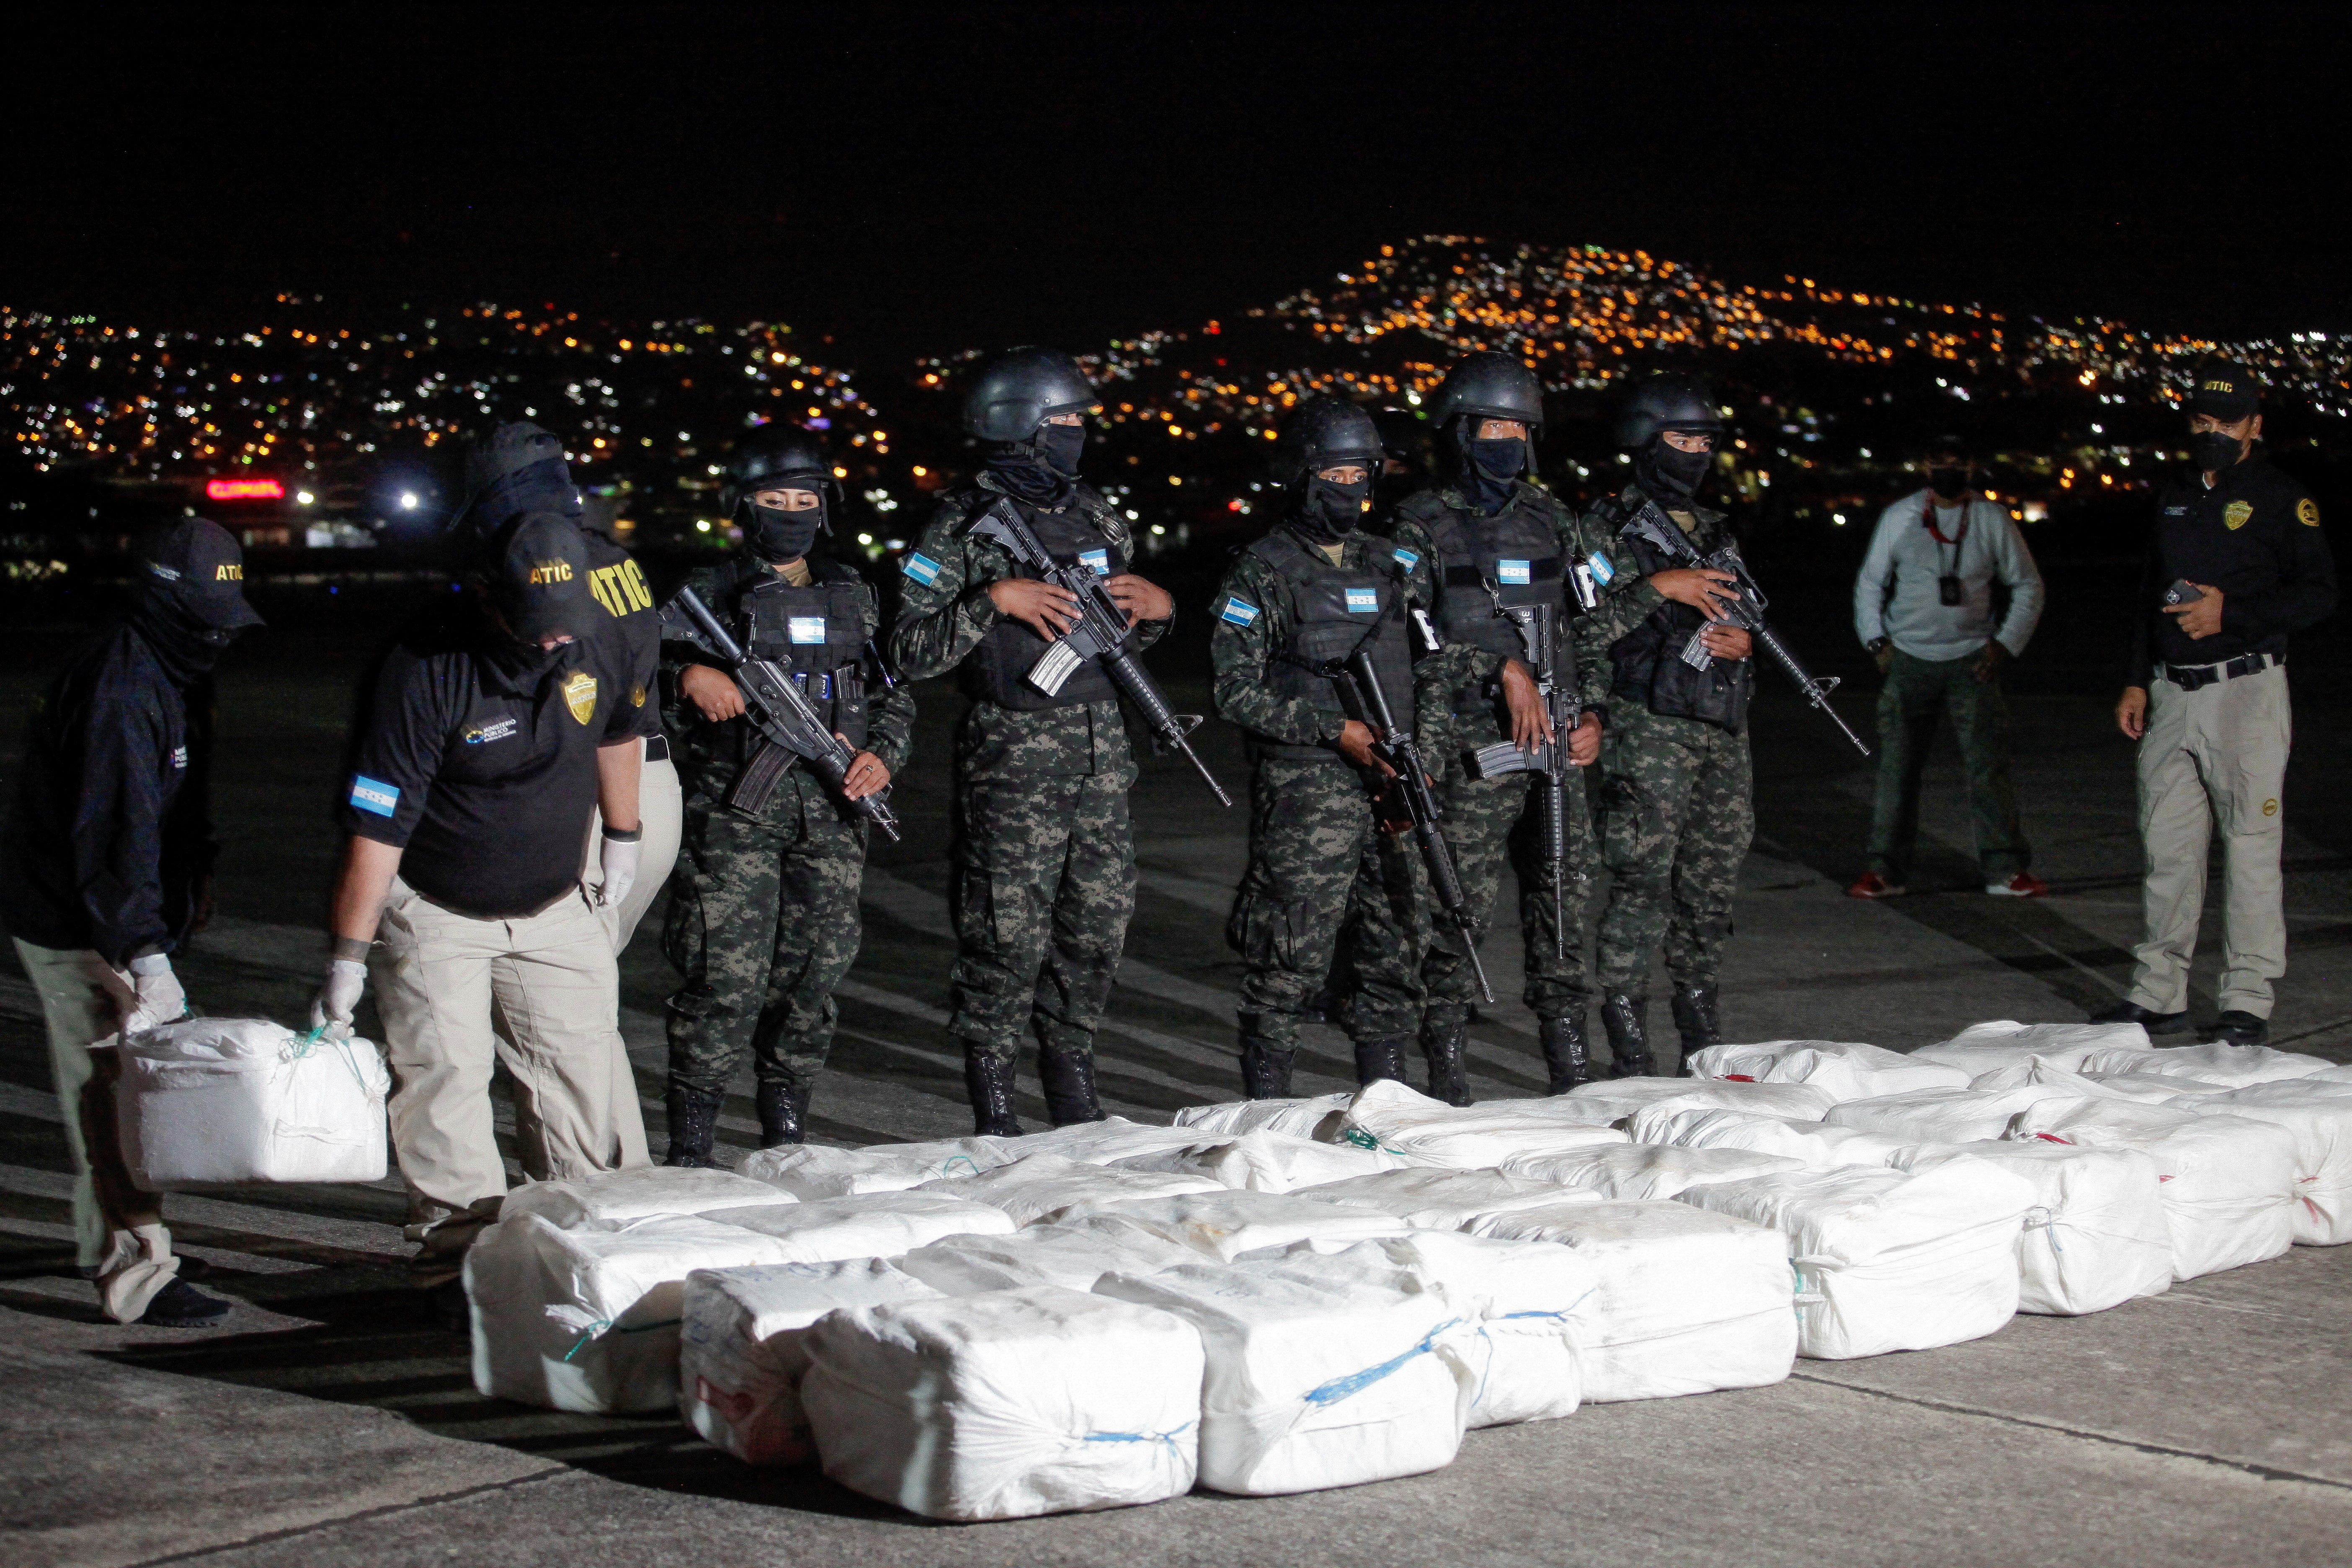 Cocaine market is booming as meth trafficking spreads, U.N. report says